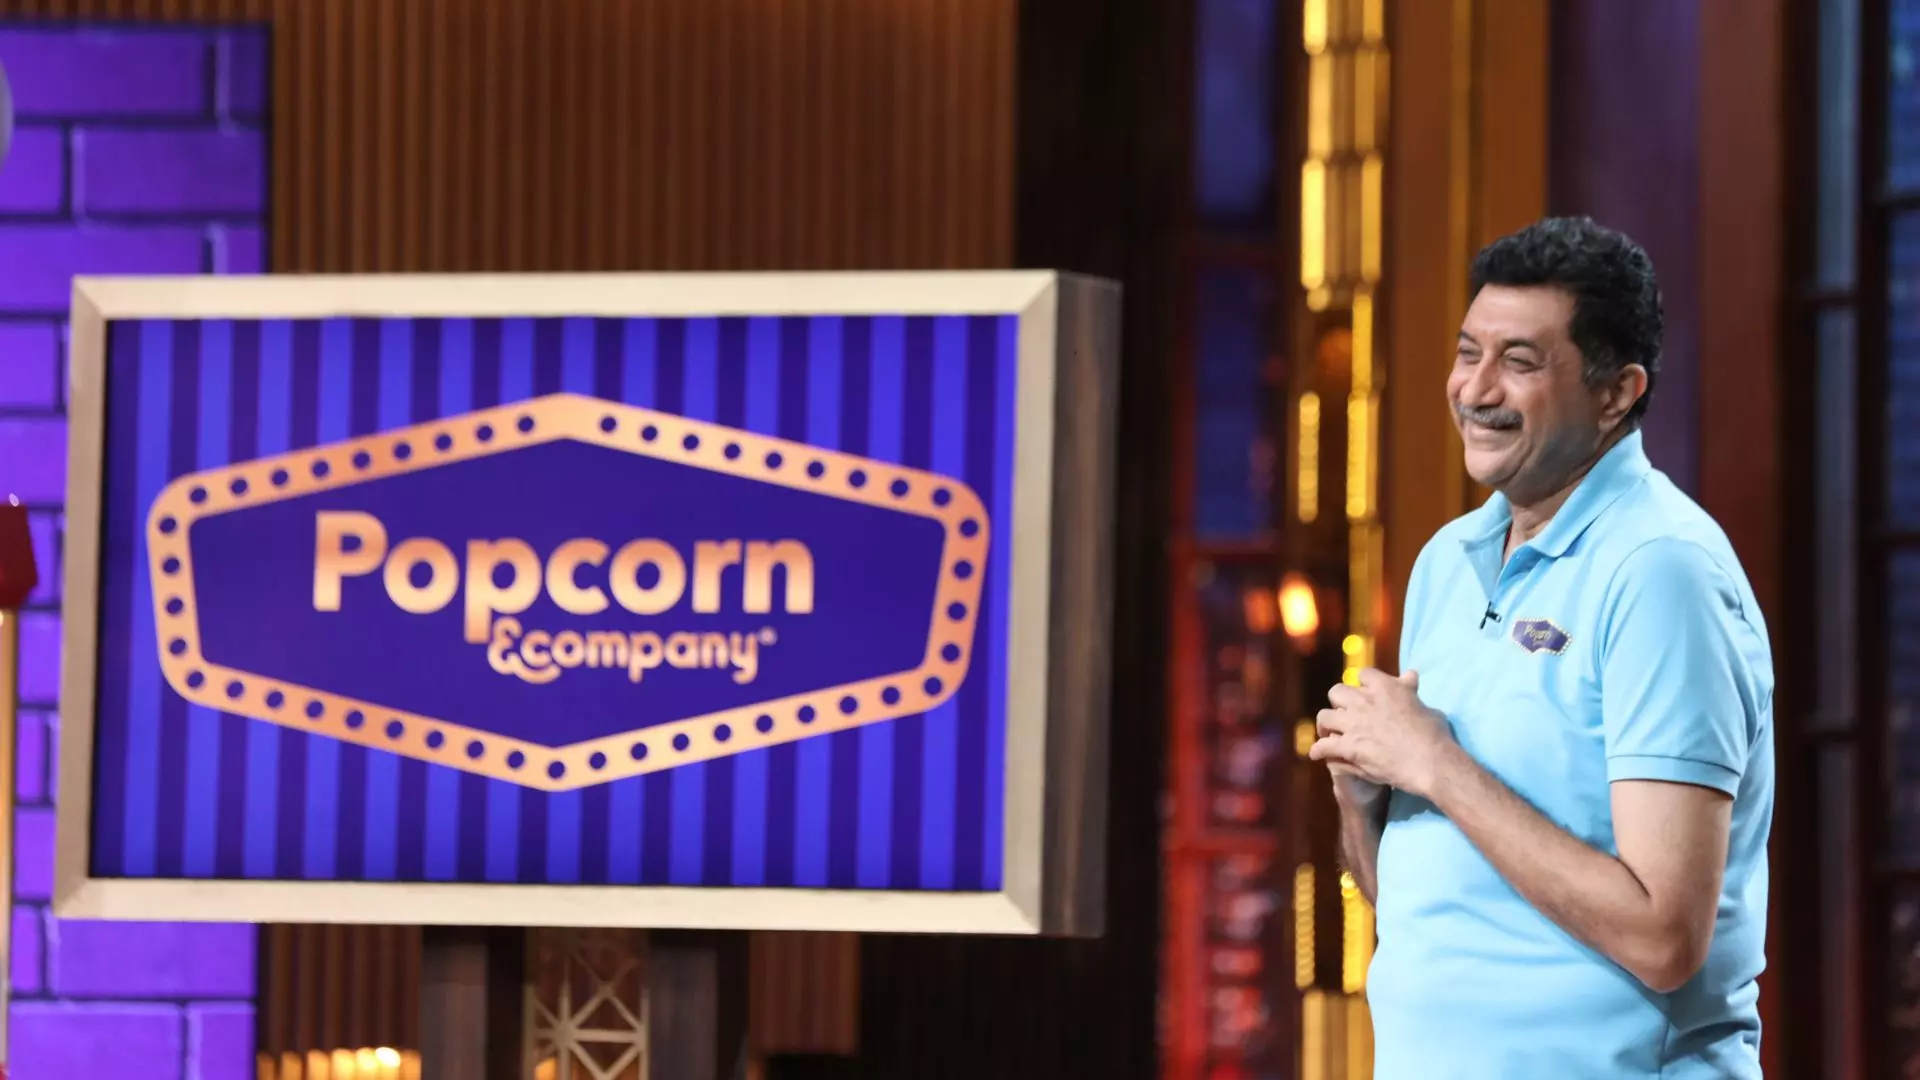 Cracking the code with Vikas Suri, CEO and Founder Popcorn & Company